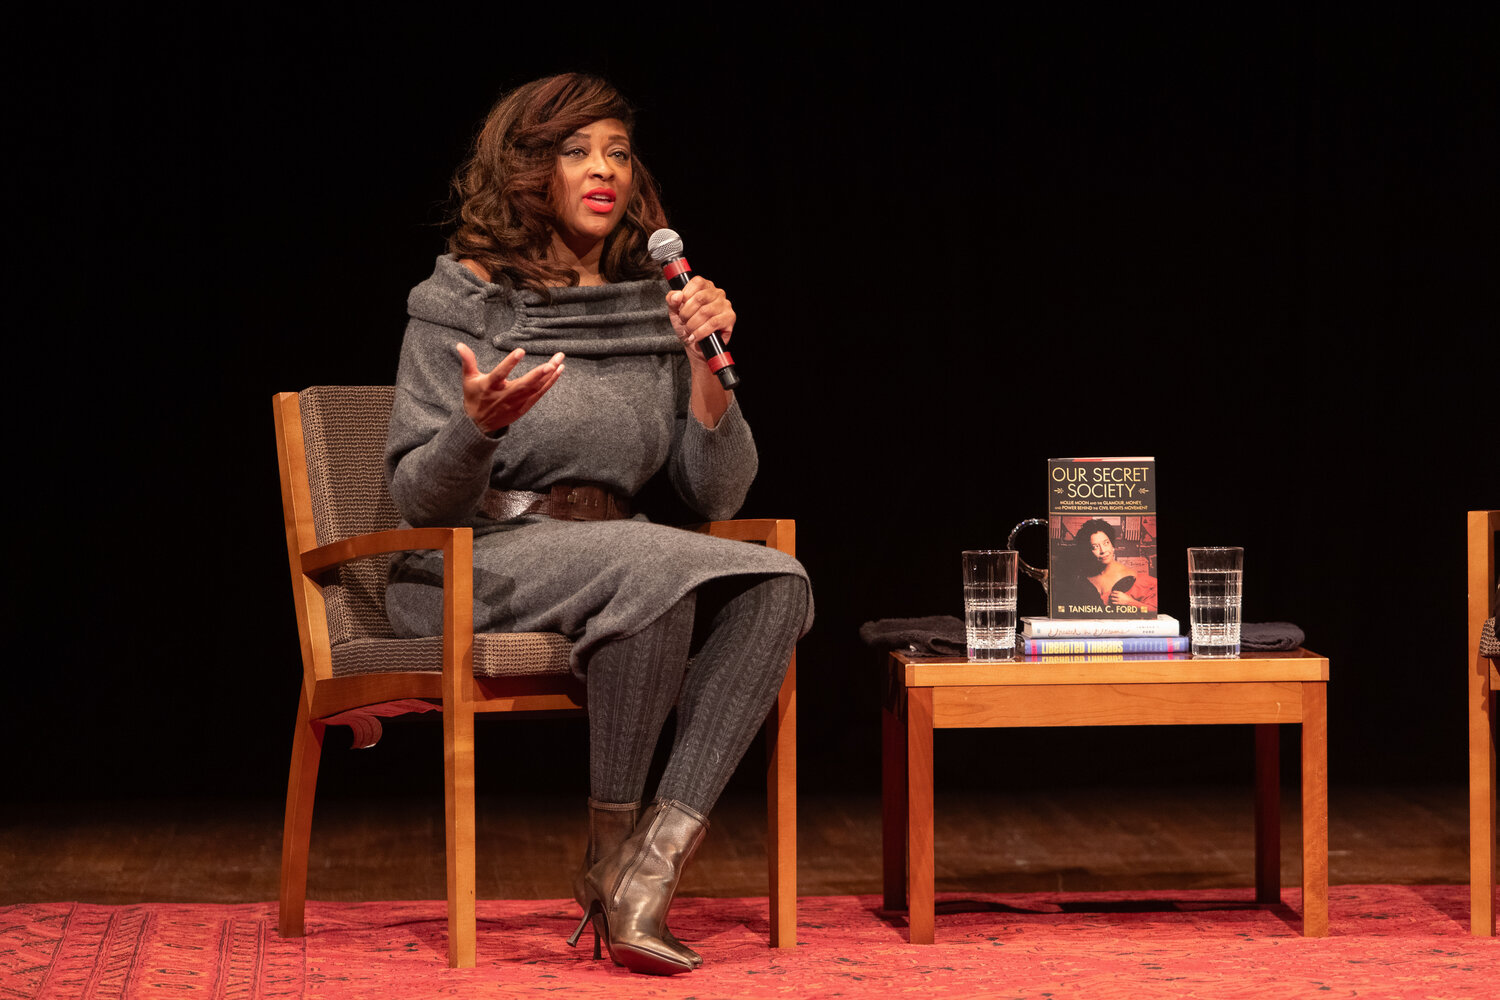 Tanisha Ford was the first of four guest lecturers during Black History Month in the 24th annual William G. Anderson Lecture Series at the Wharton Center for Performing Arts yesterday. She spoke about her fourth book, “Our Secret Society: Mollie Moon and the Glamour, Money, and Power Behind the Civil Rights Movement,” which follows Moon's life and activism as a pioneering Black woman working in traditionally white philanthropist spaces in New York City during the time of the Civil Rights movement.